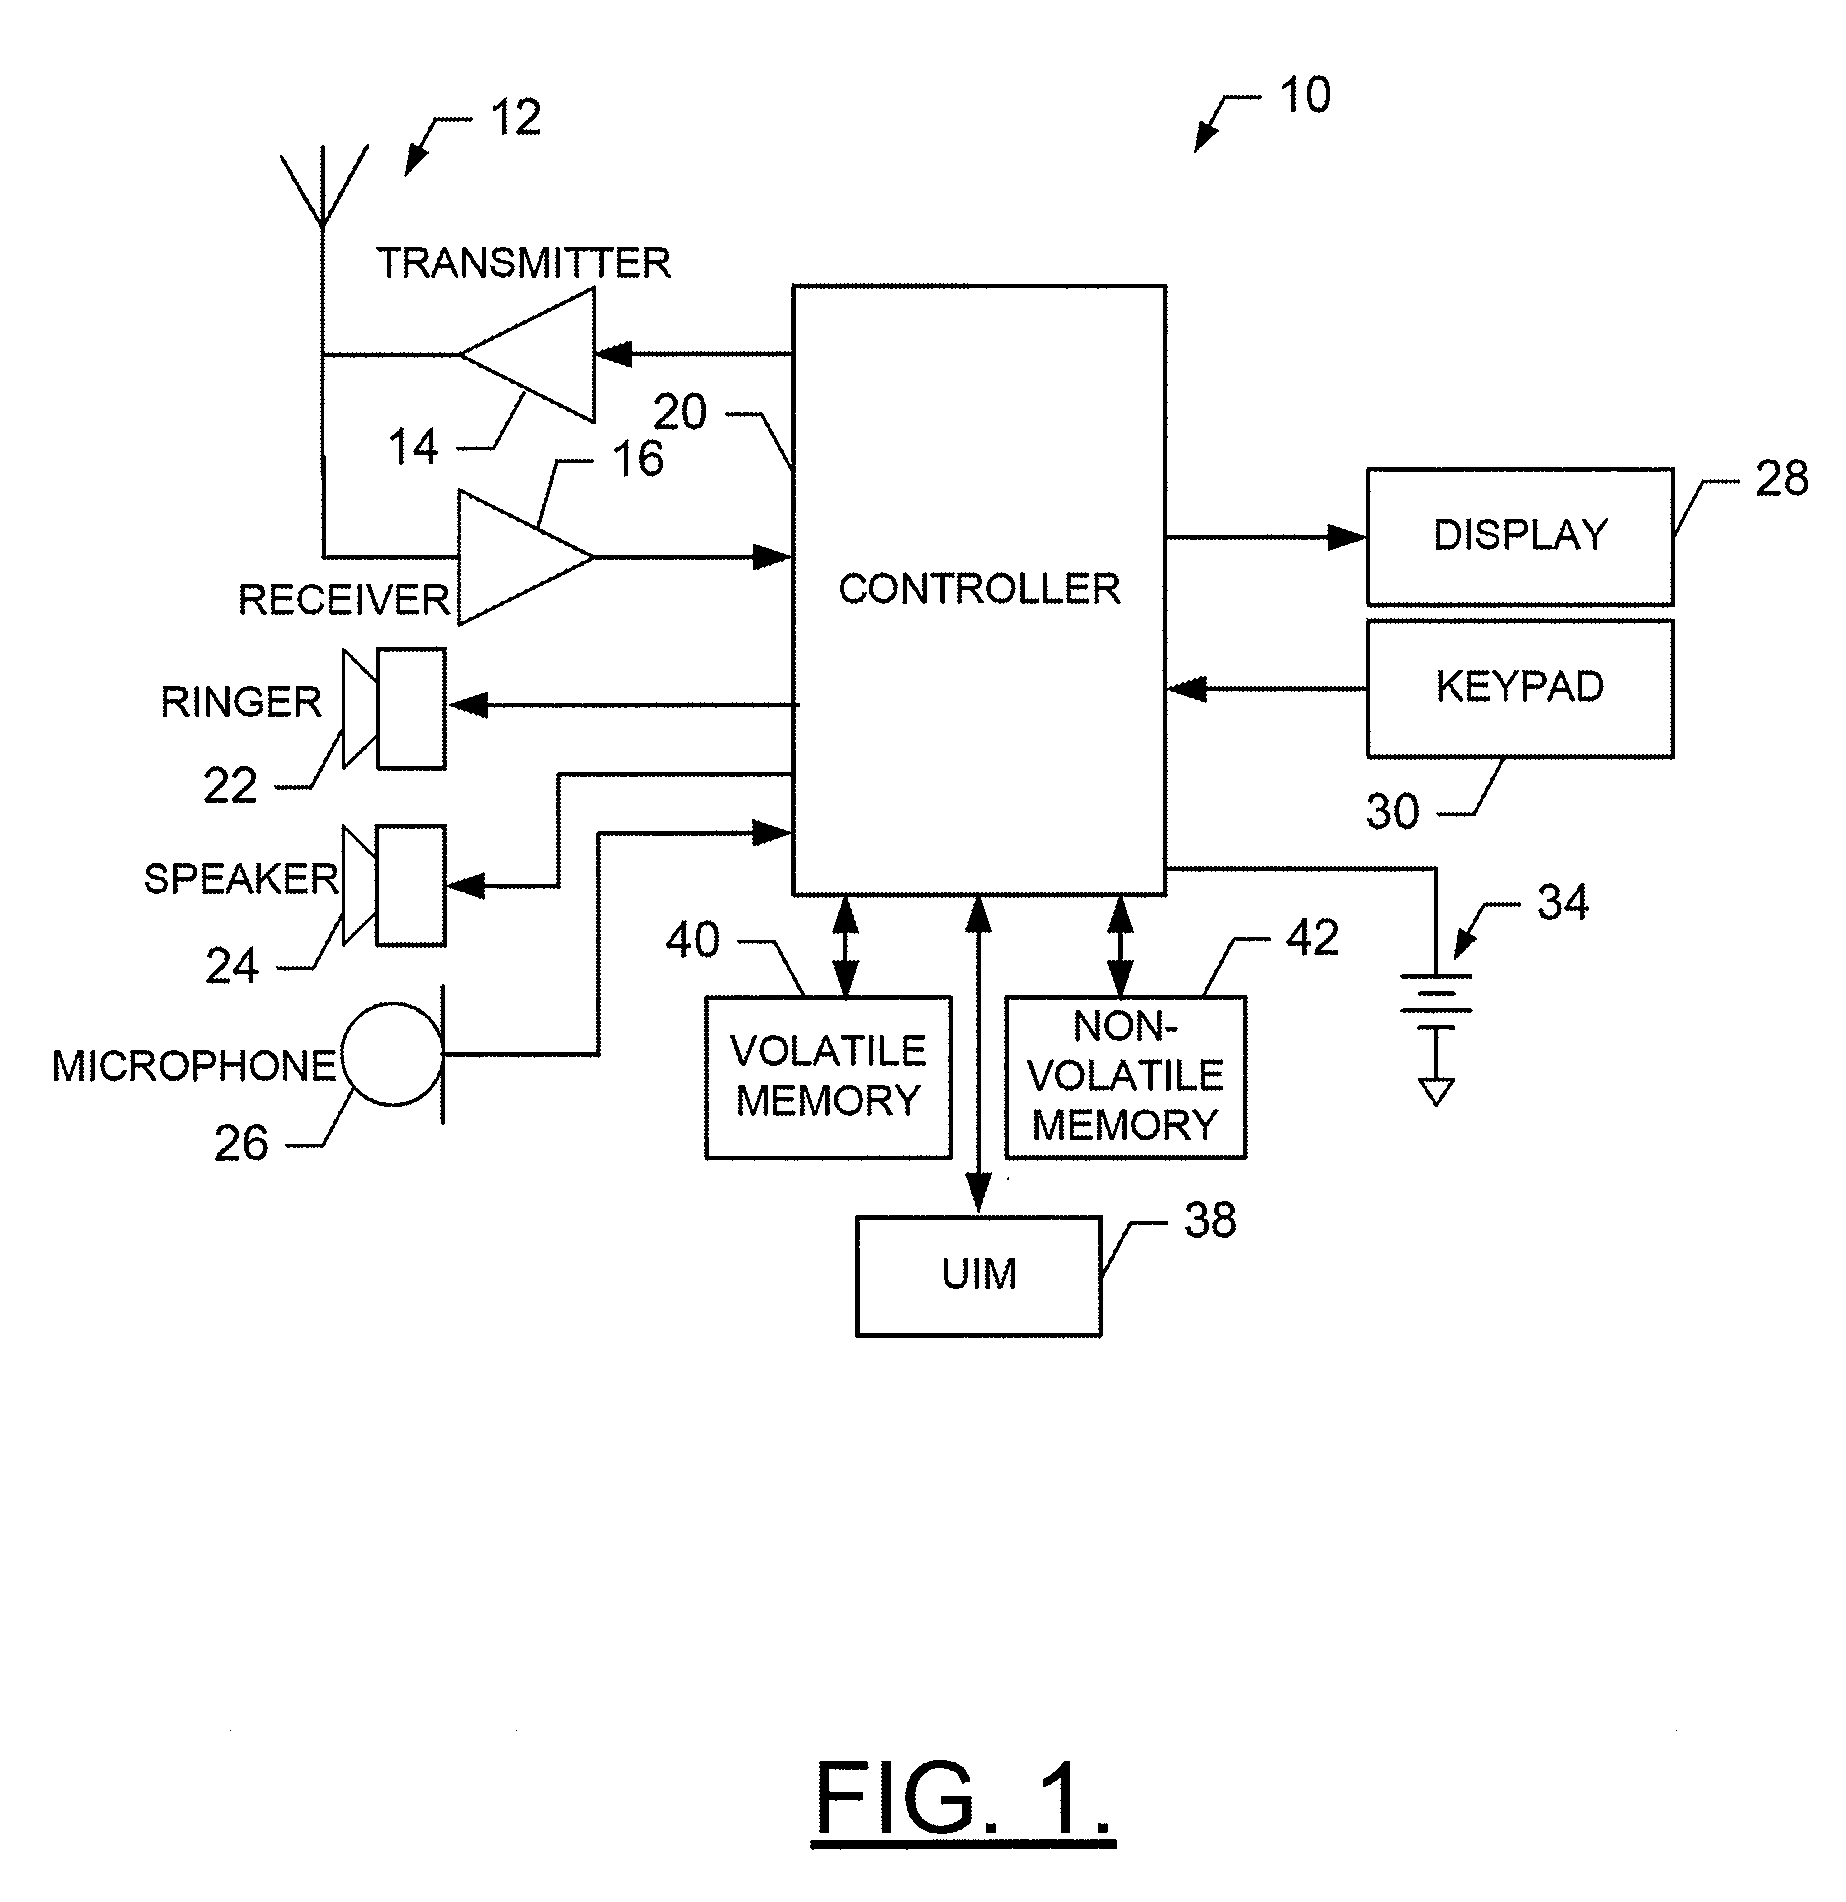 Method, Apparatus and Computer Program Product for Providing a Scrolling Mechanism for Touch Screen Devices